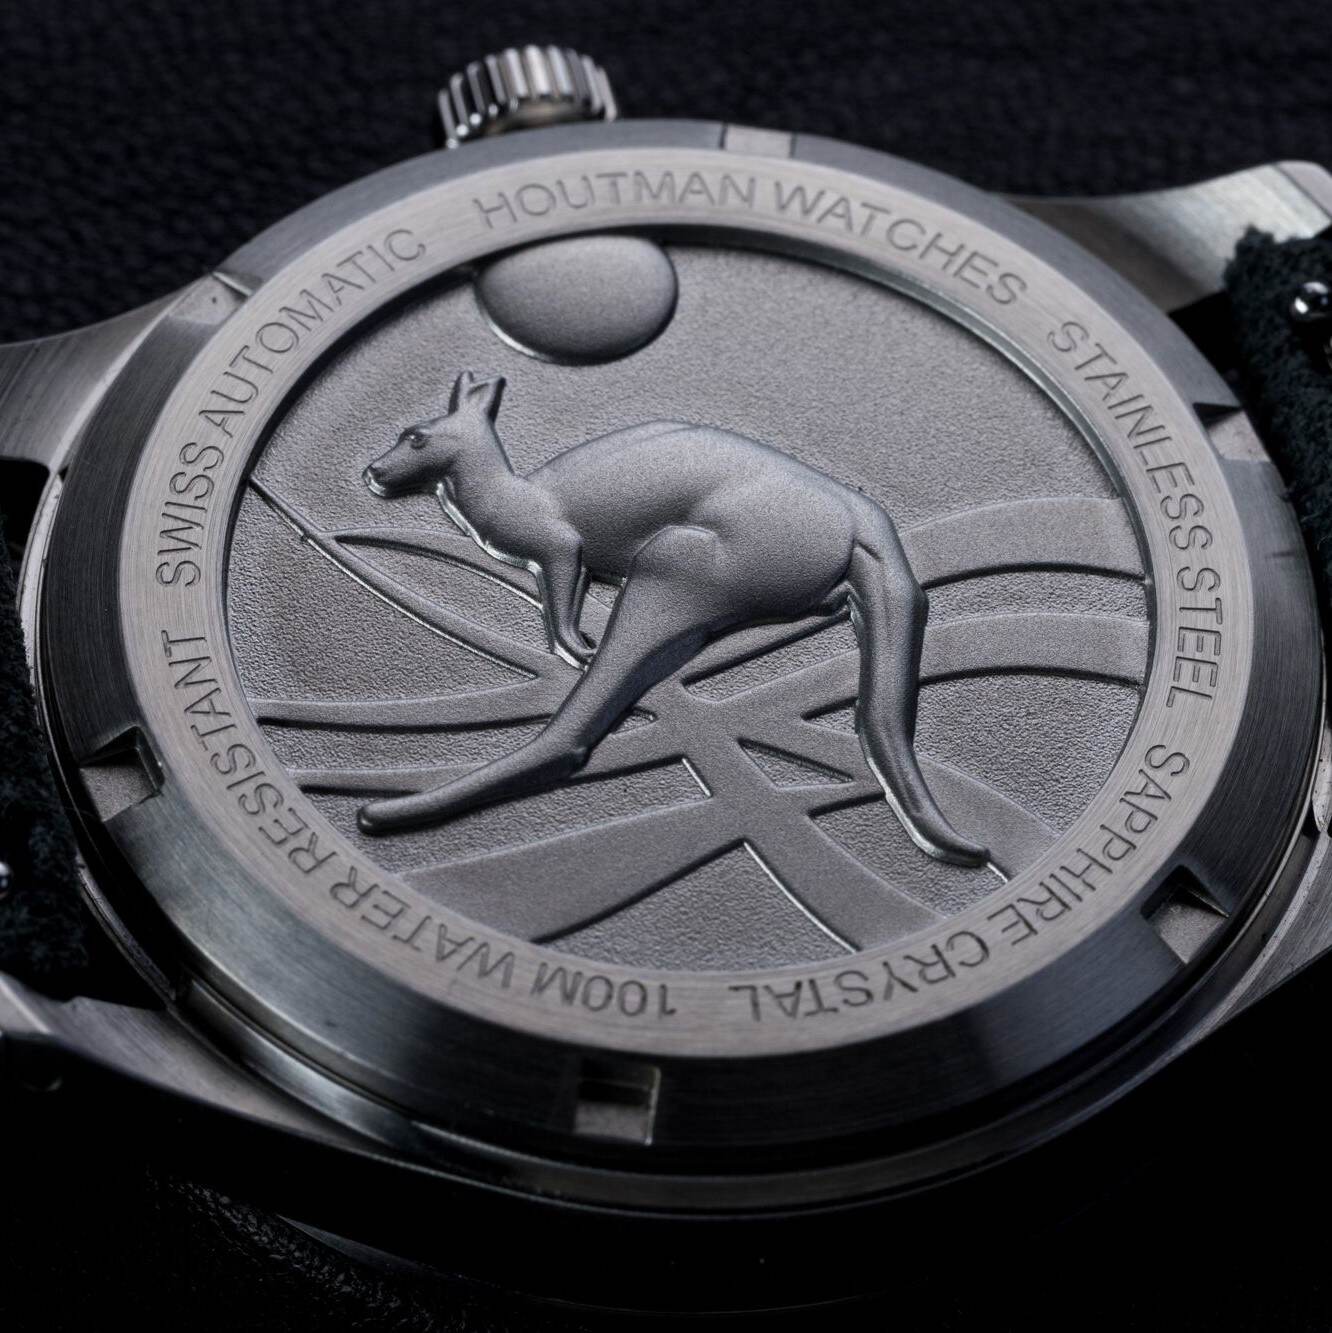 Unique watch case back with 3d kangaroo